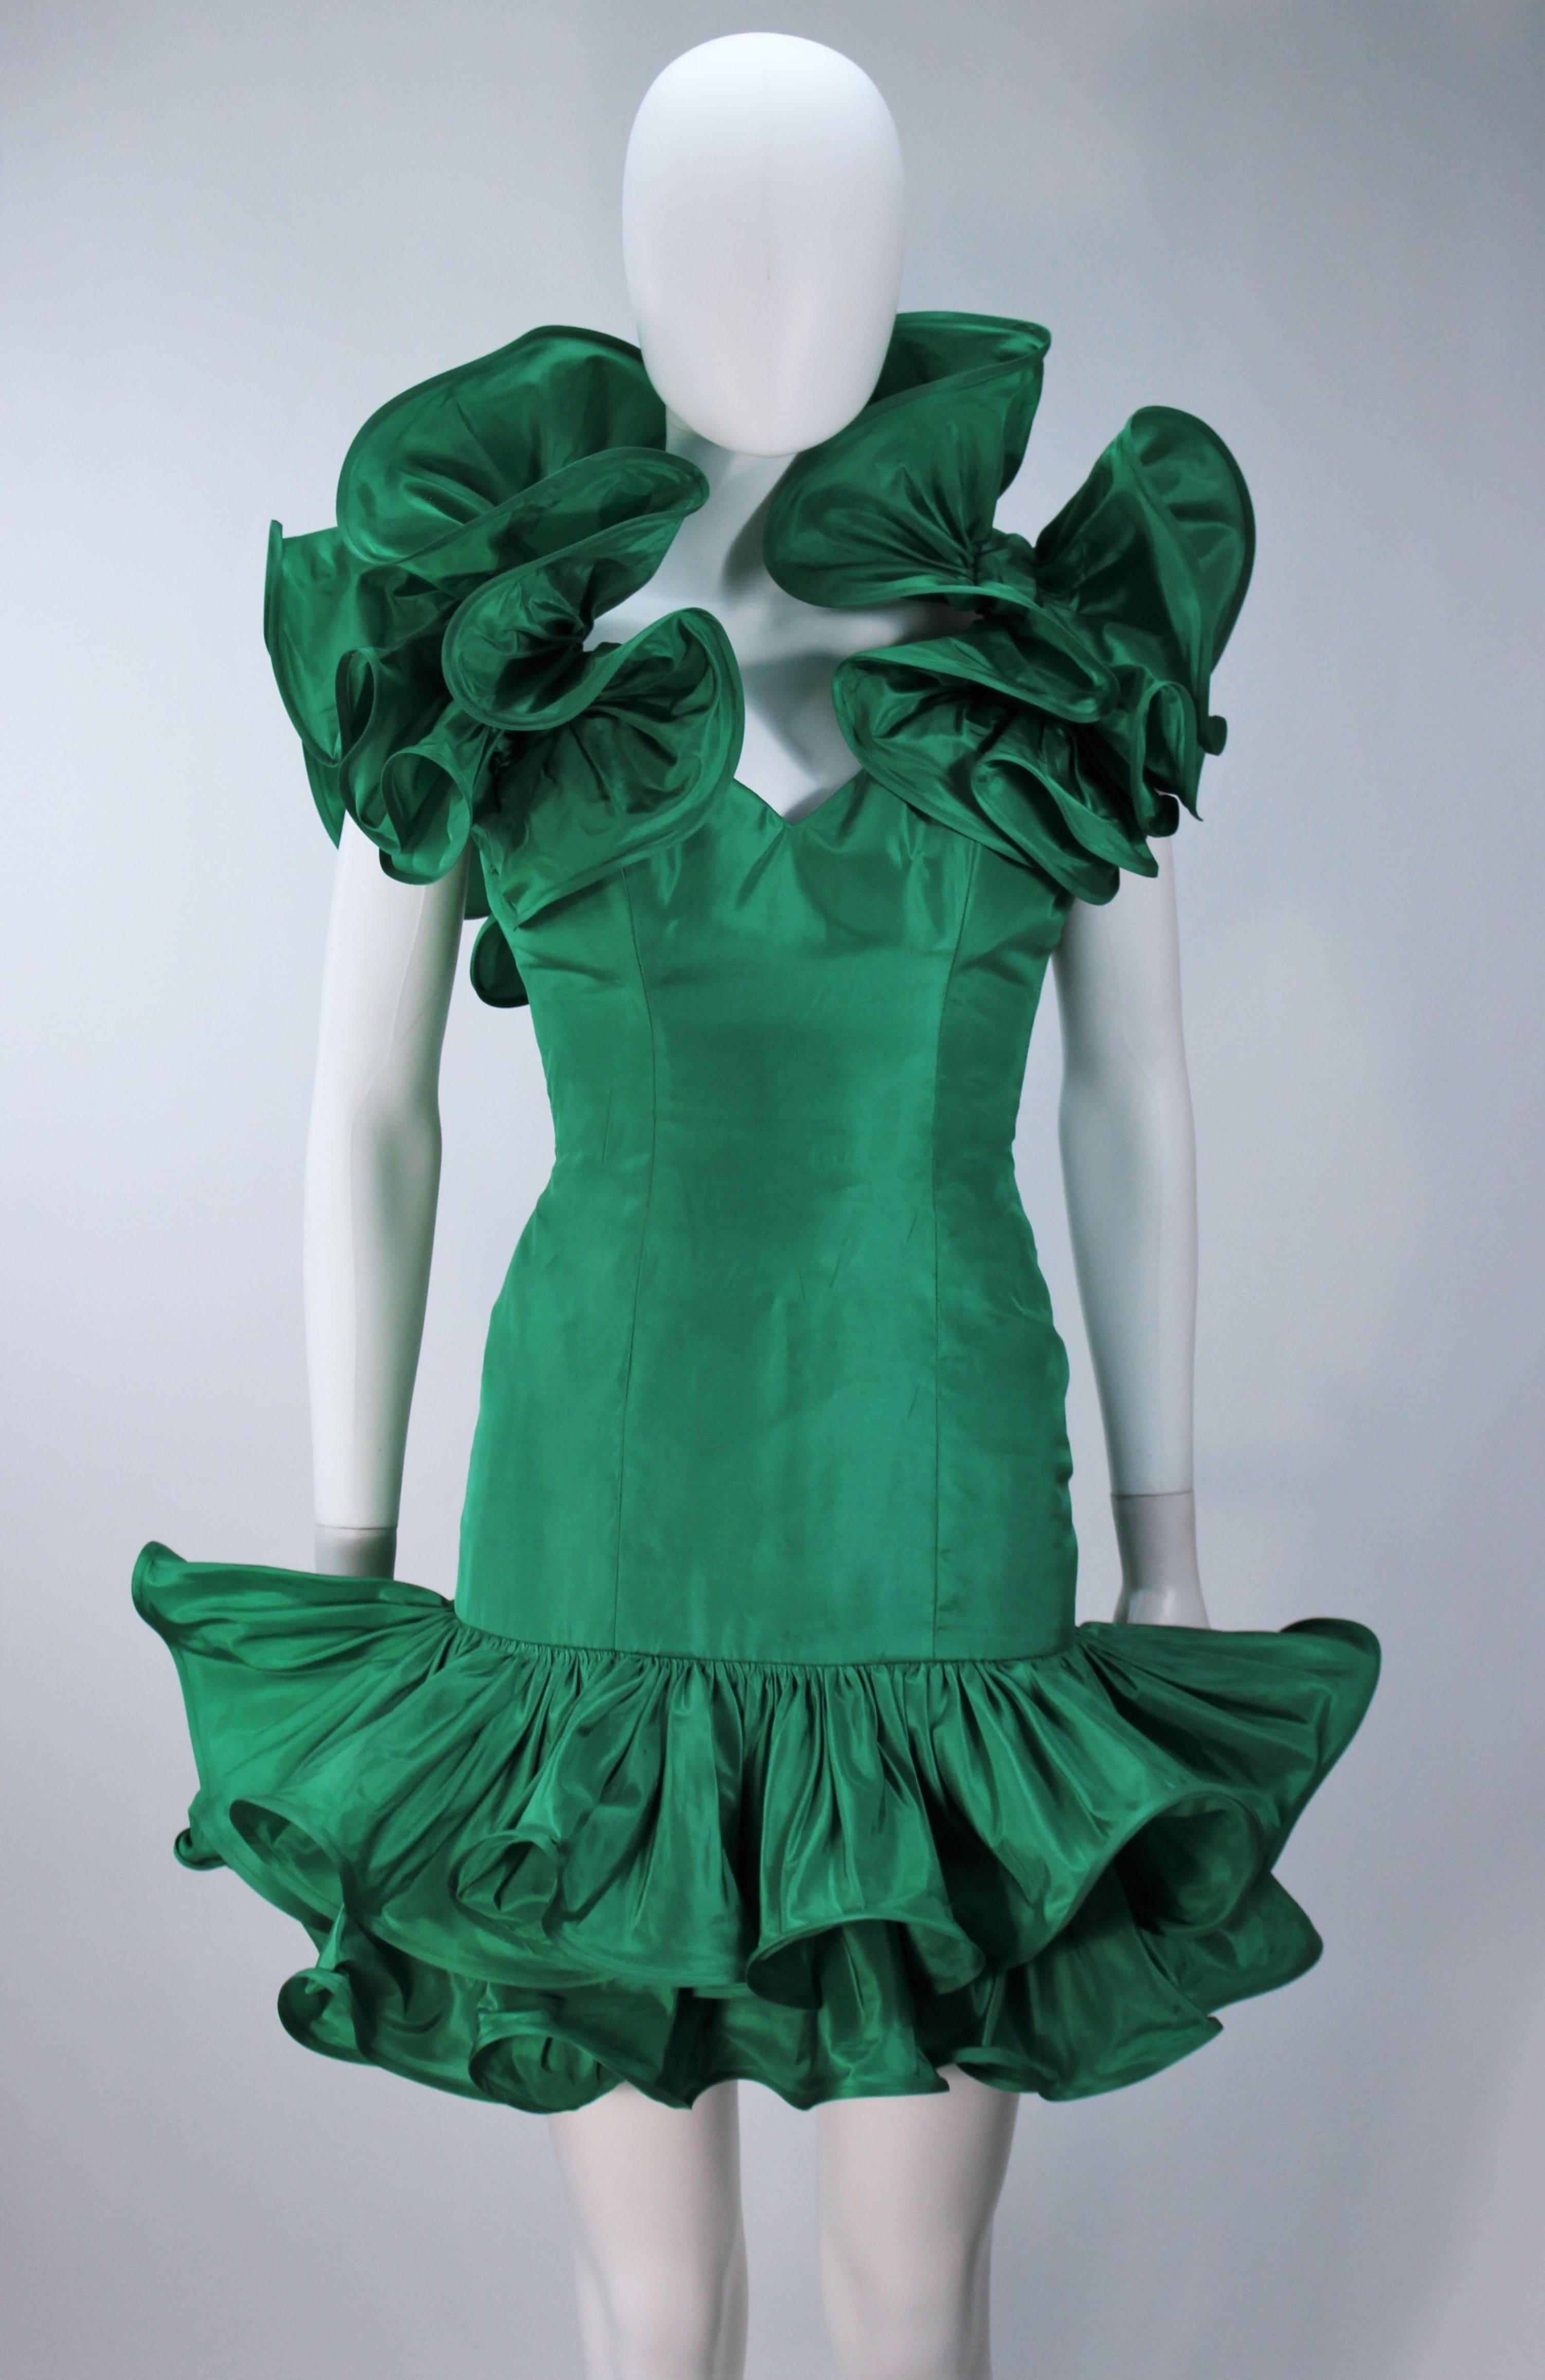 Blue TRAVILLA Attributed Kelly Green Ruffled Cocktail Dress Size 6